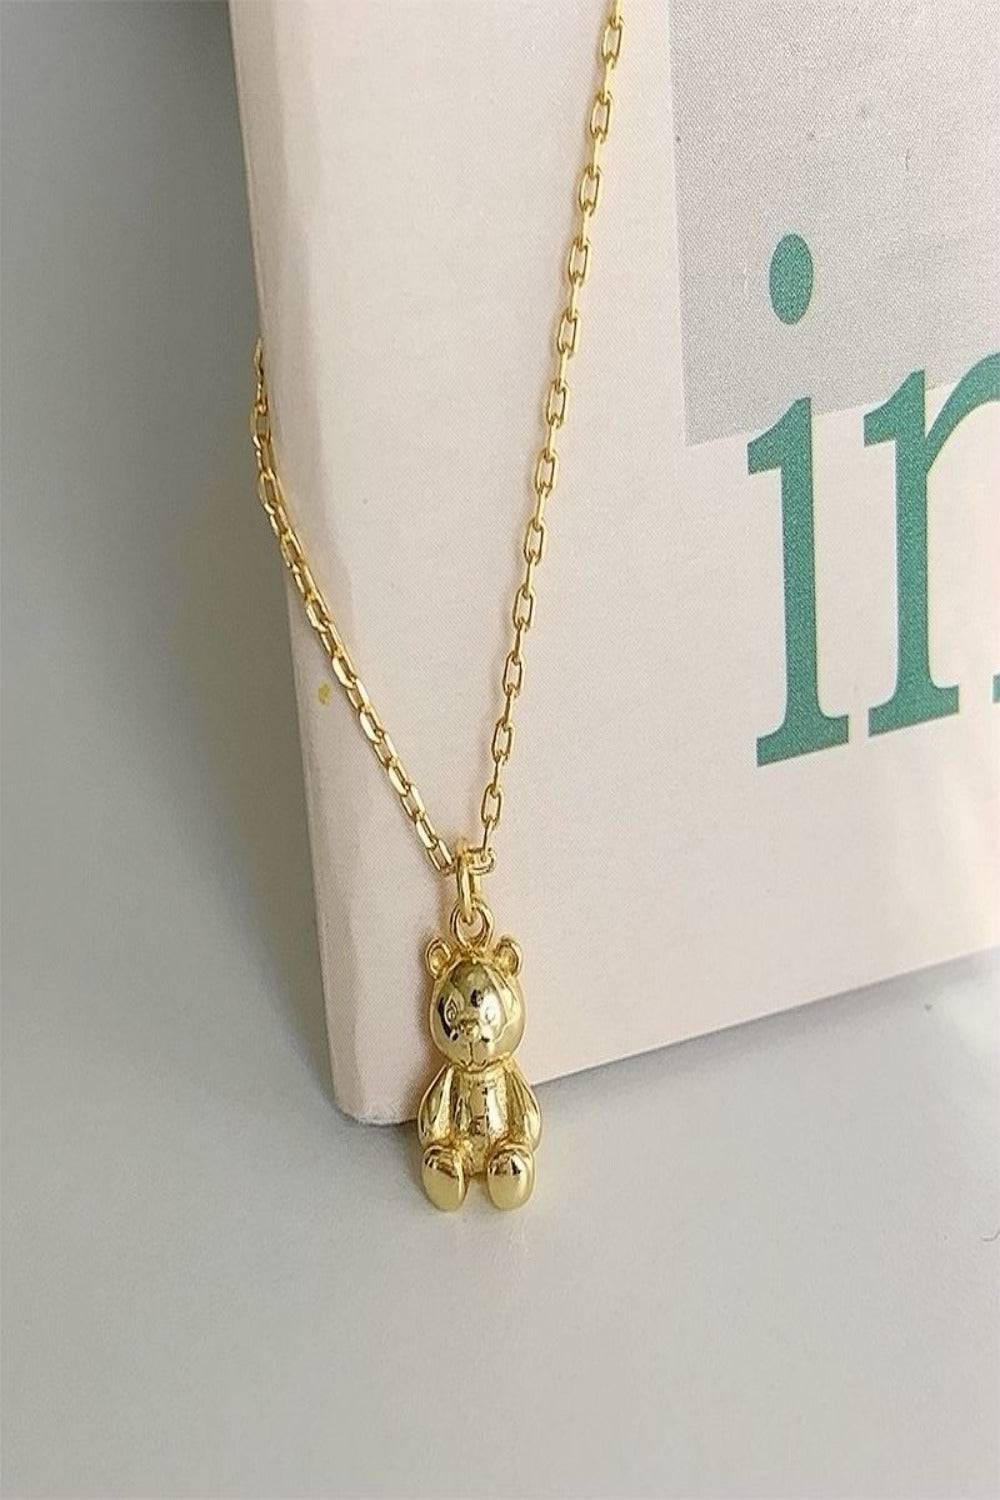 Gold Teddy Bear Charm Necklace - TGC Boutique - Gold Necklace